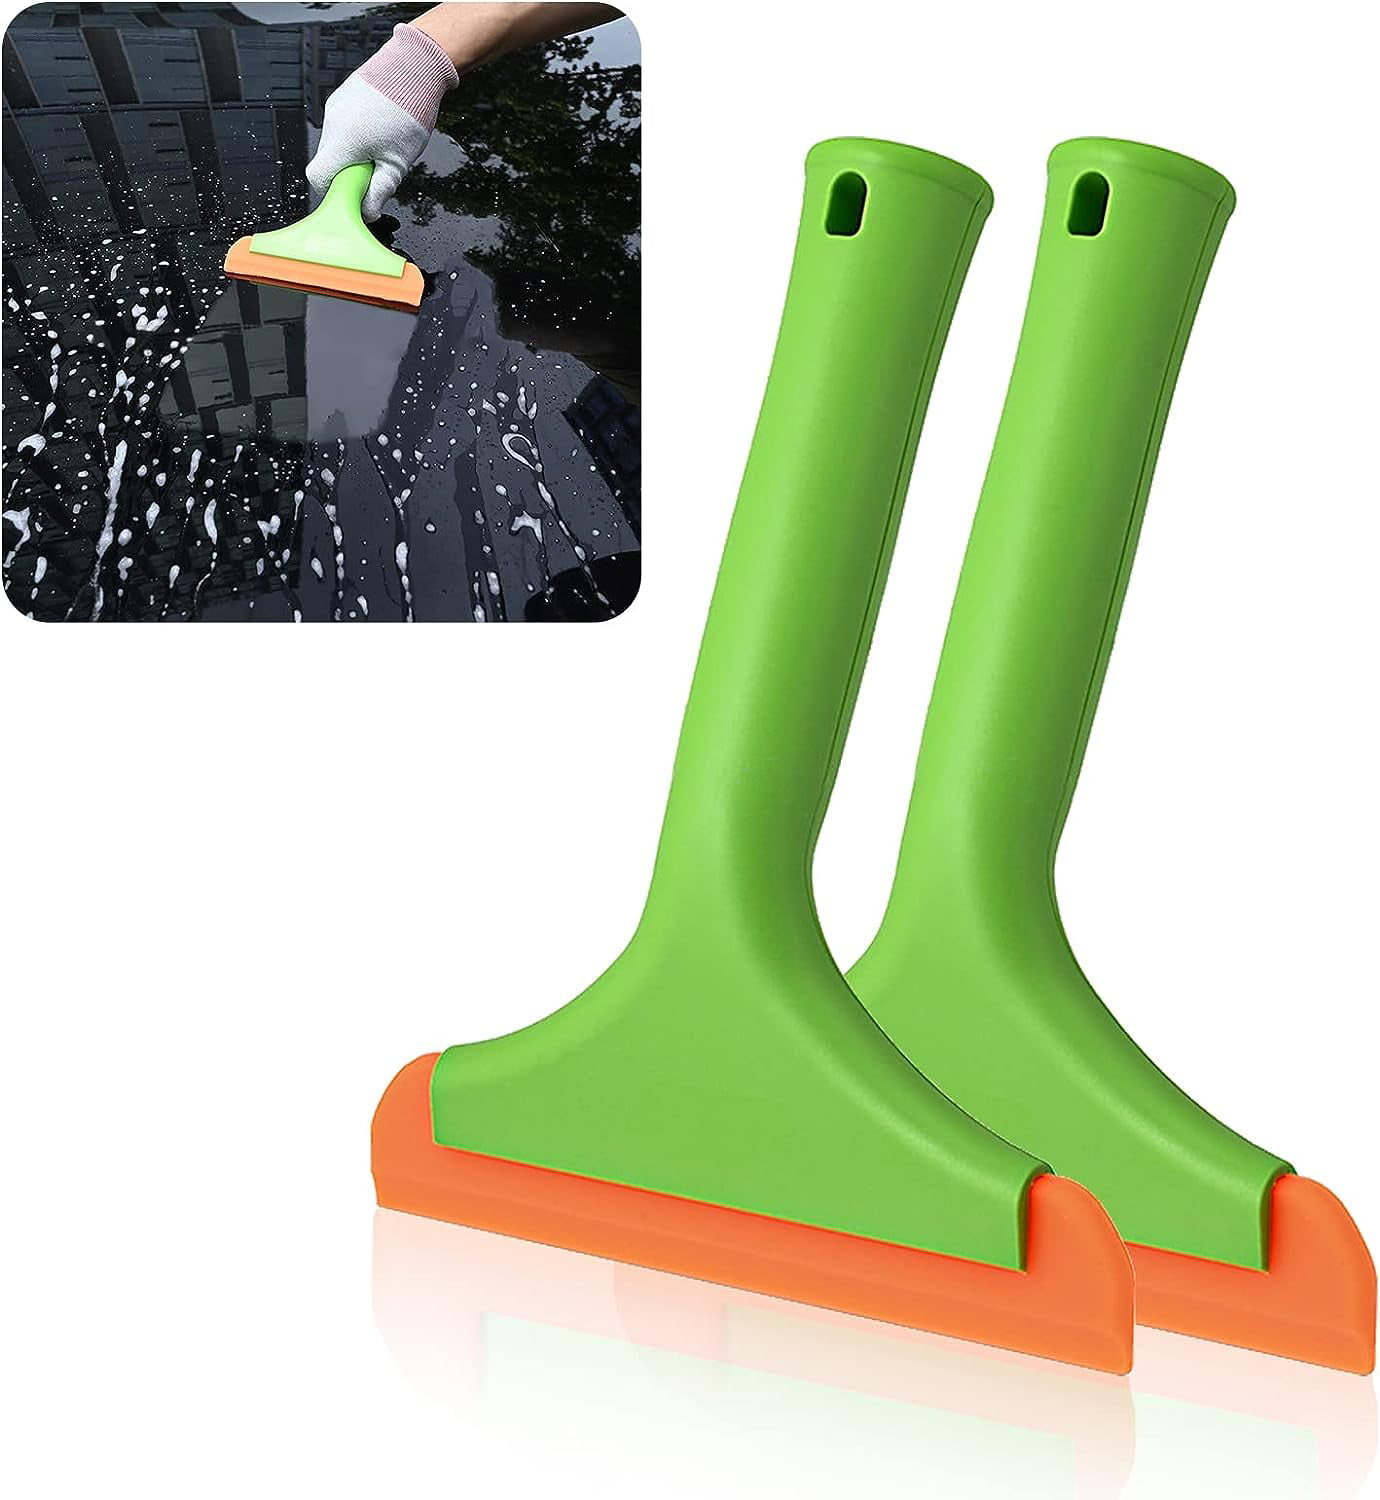 1pc, Super Flexible Silicone Squeegee, Auto Water, Water Wiper, Shower  Squeegee, For Car Windshield, Window, Mirror, Glass Door